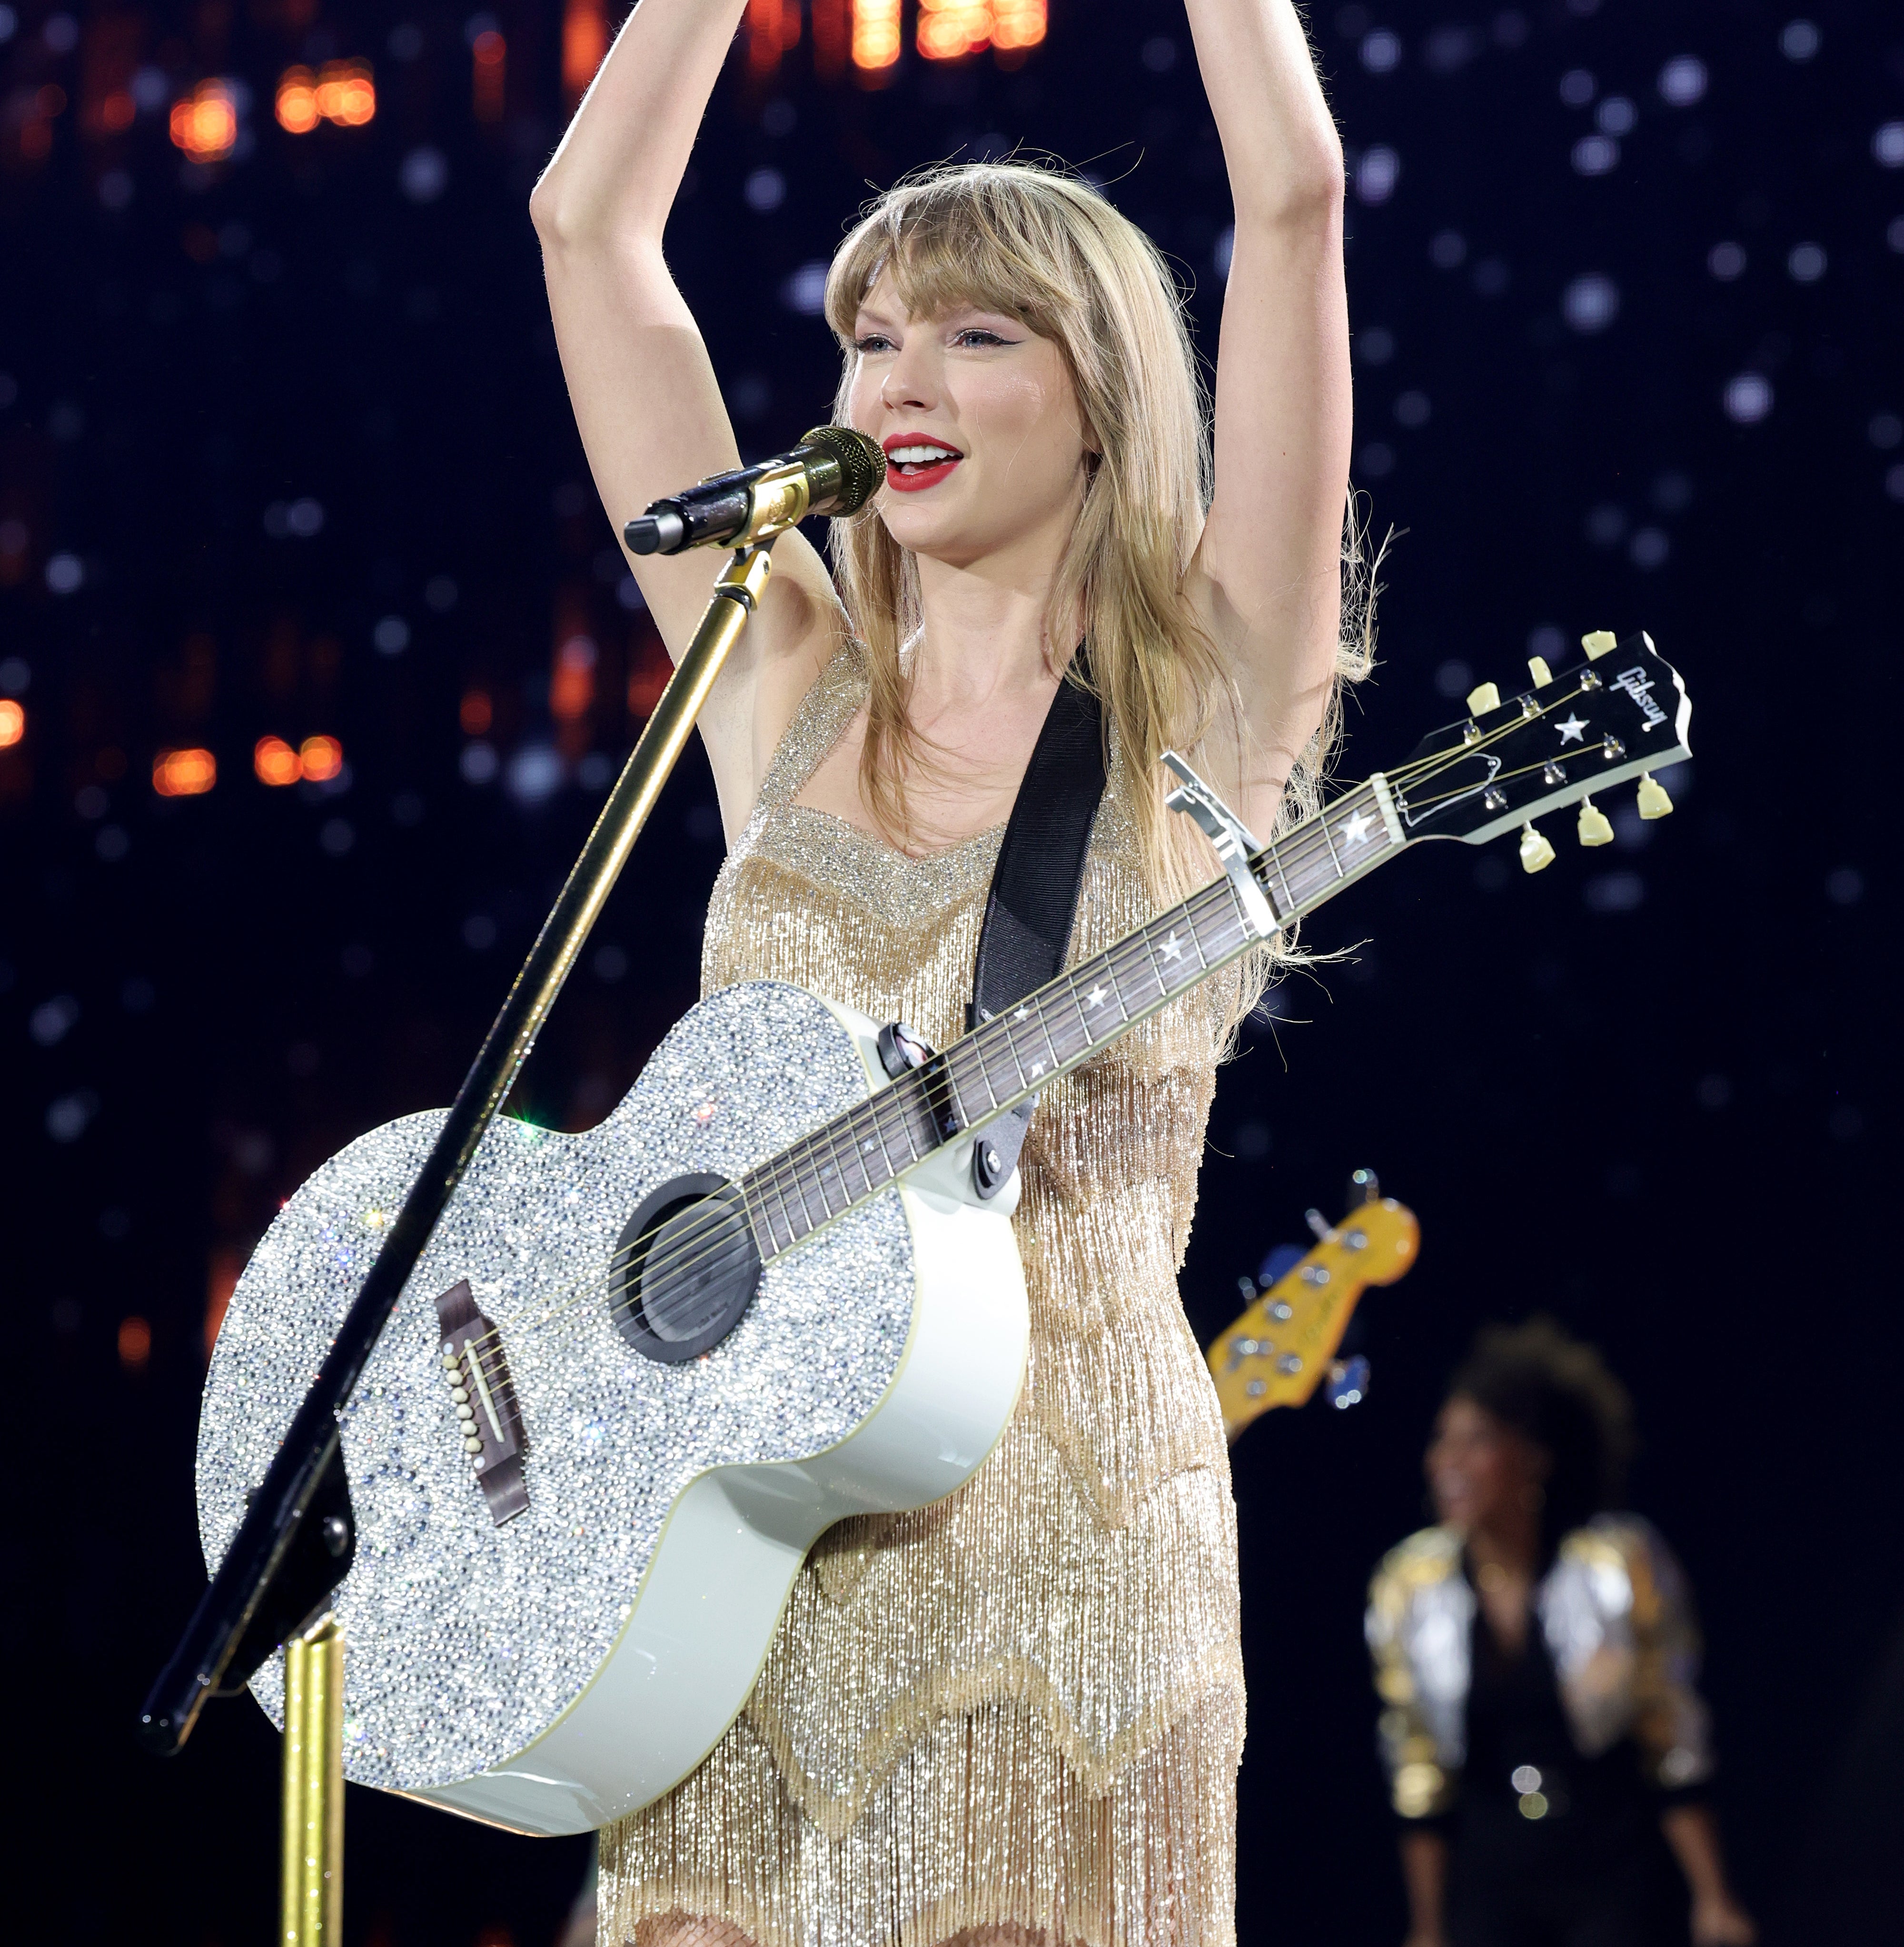 Taylor Swift at a concert, holding her arms aloft to form a heart with her hands